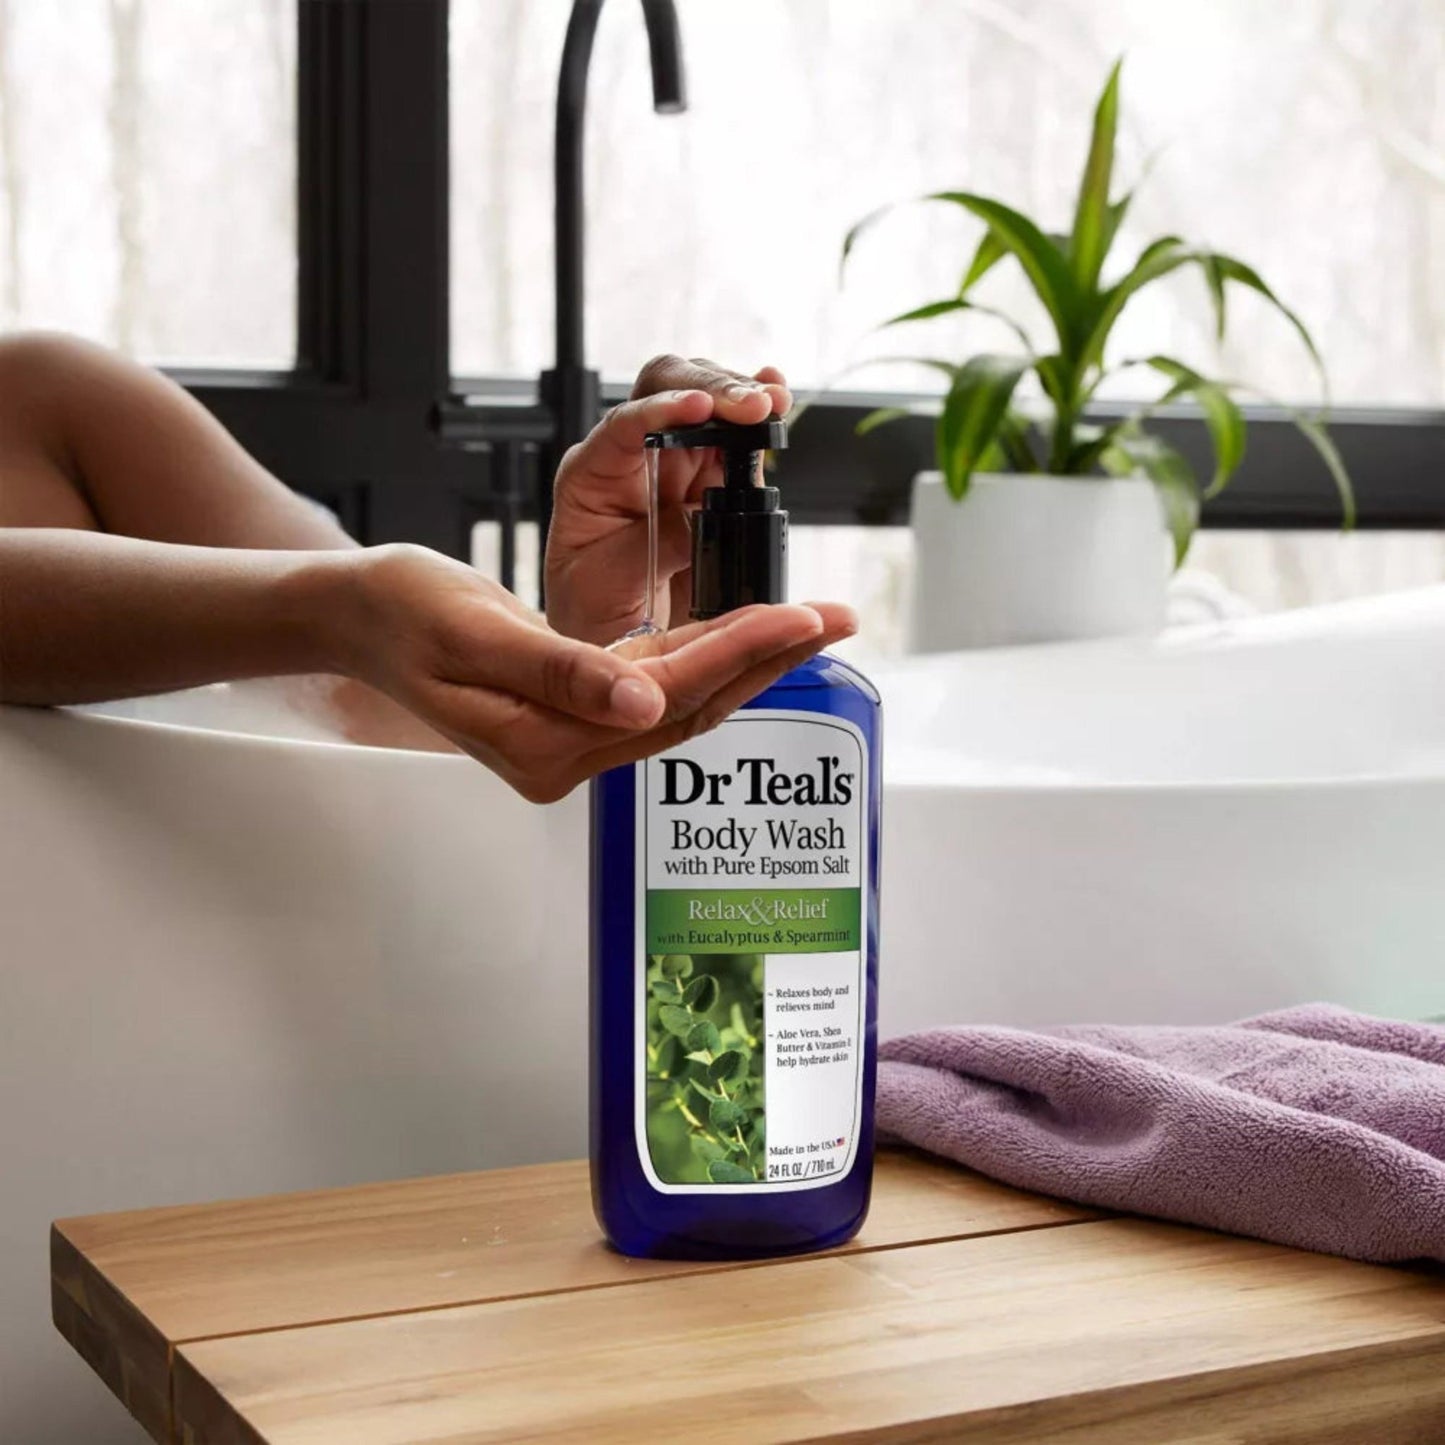 Dr Teal's Relax & Relief Eucalyptus & Spearmint Body Wash - (710mL)